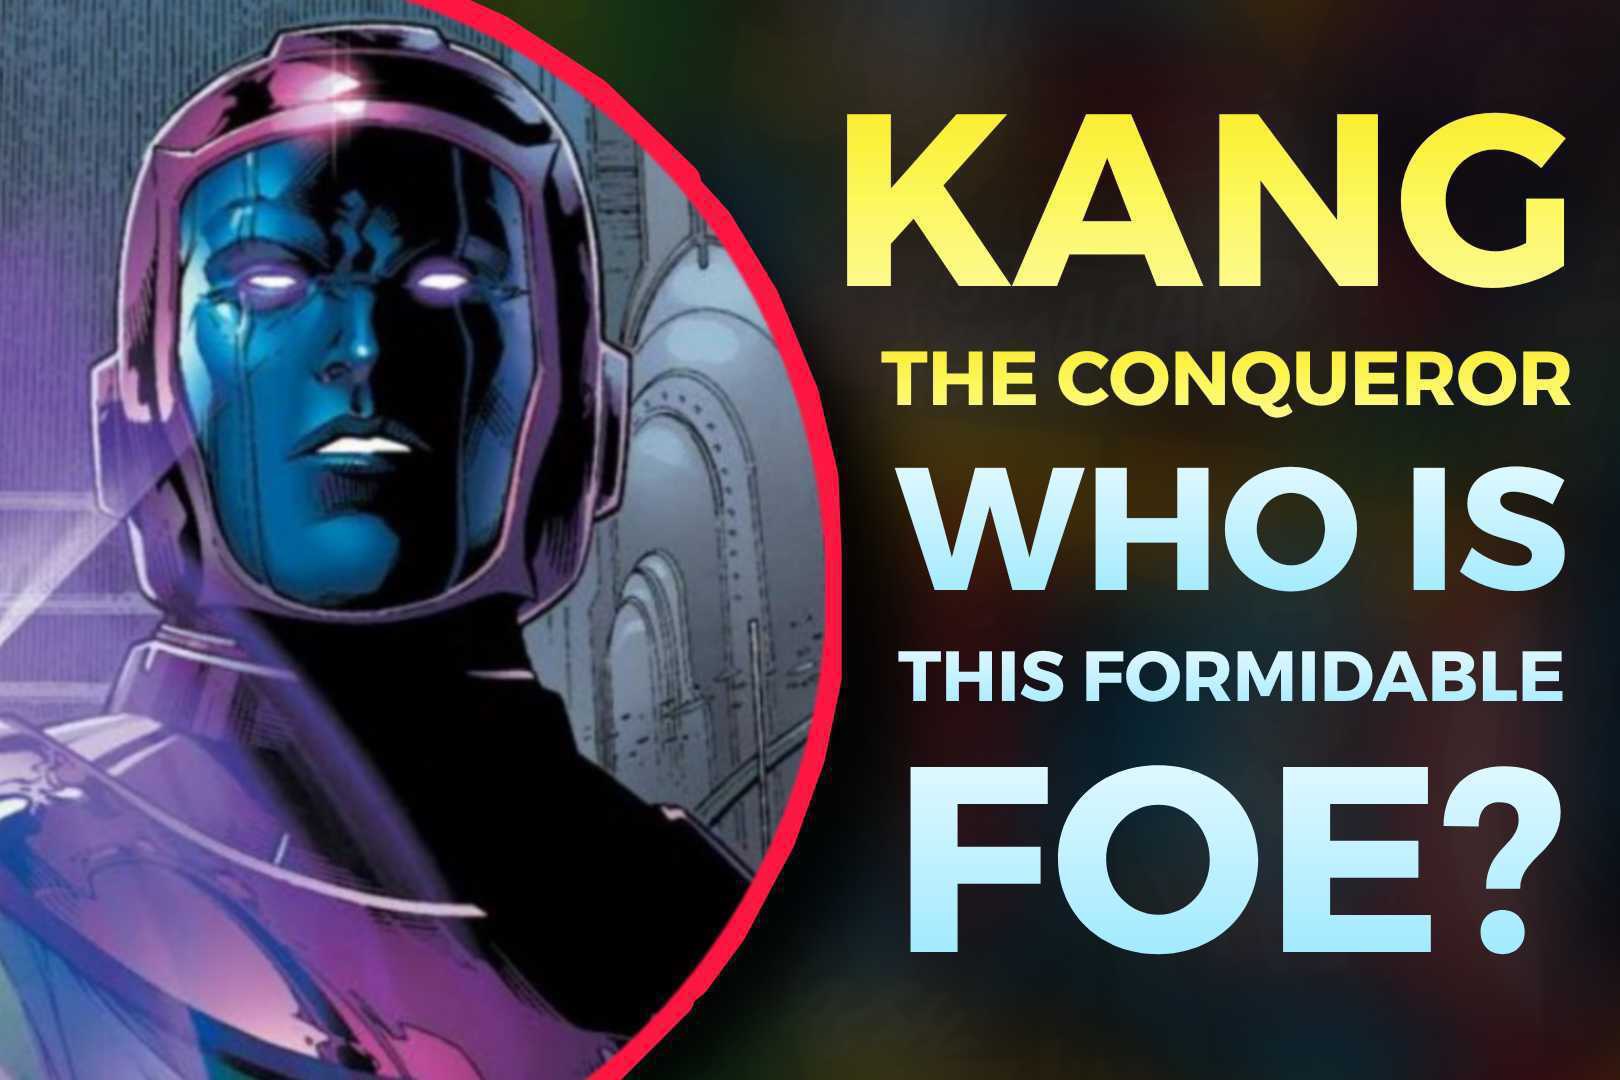 Kang The Conqueror: Who Is This Formidable Foe?